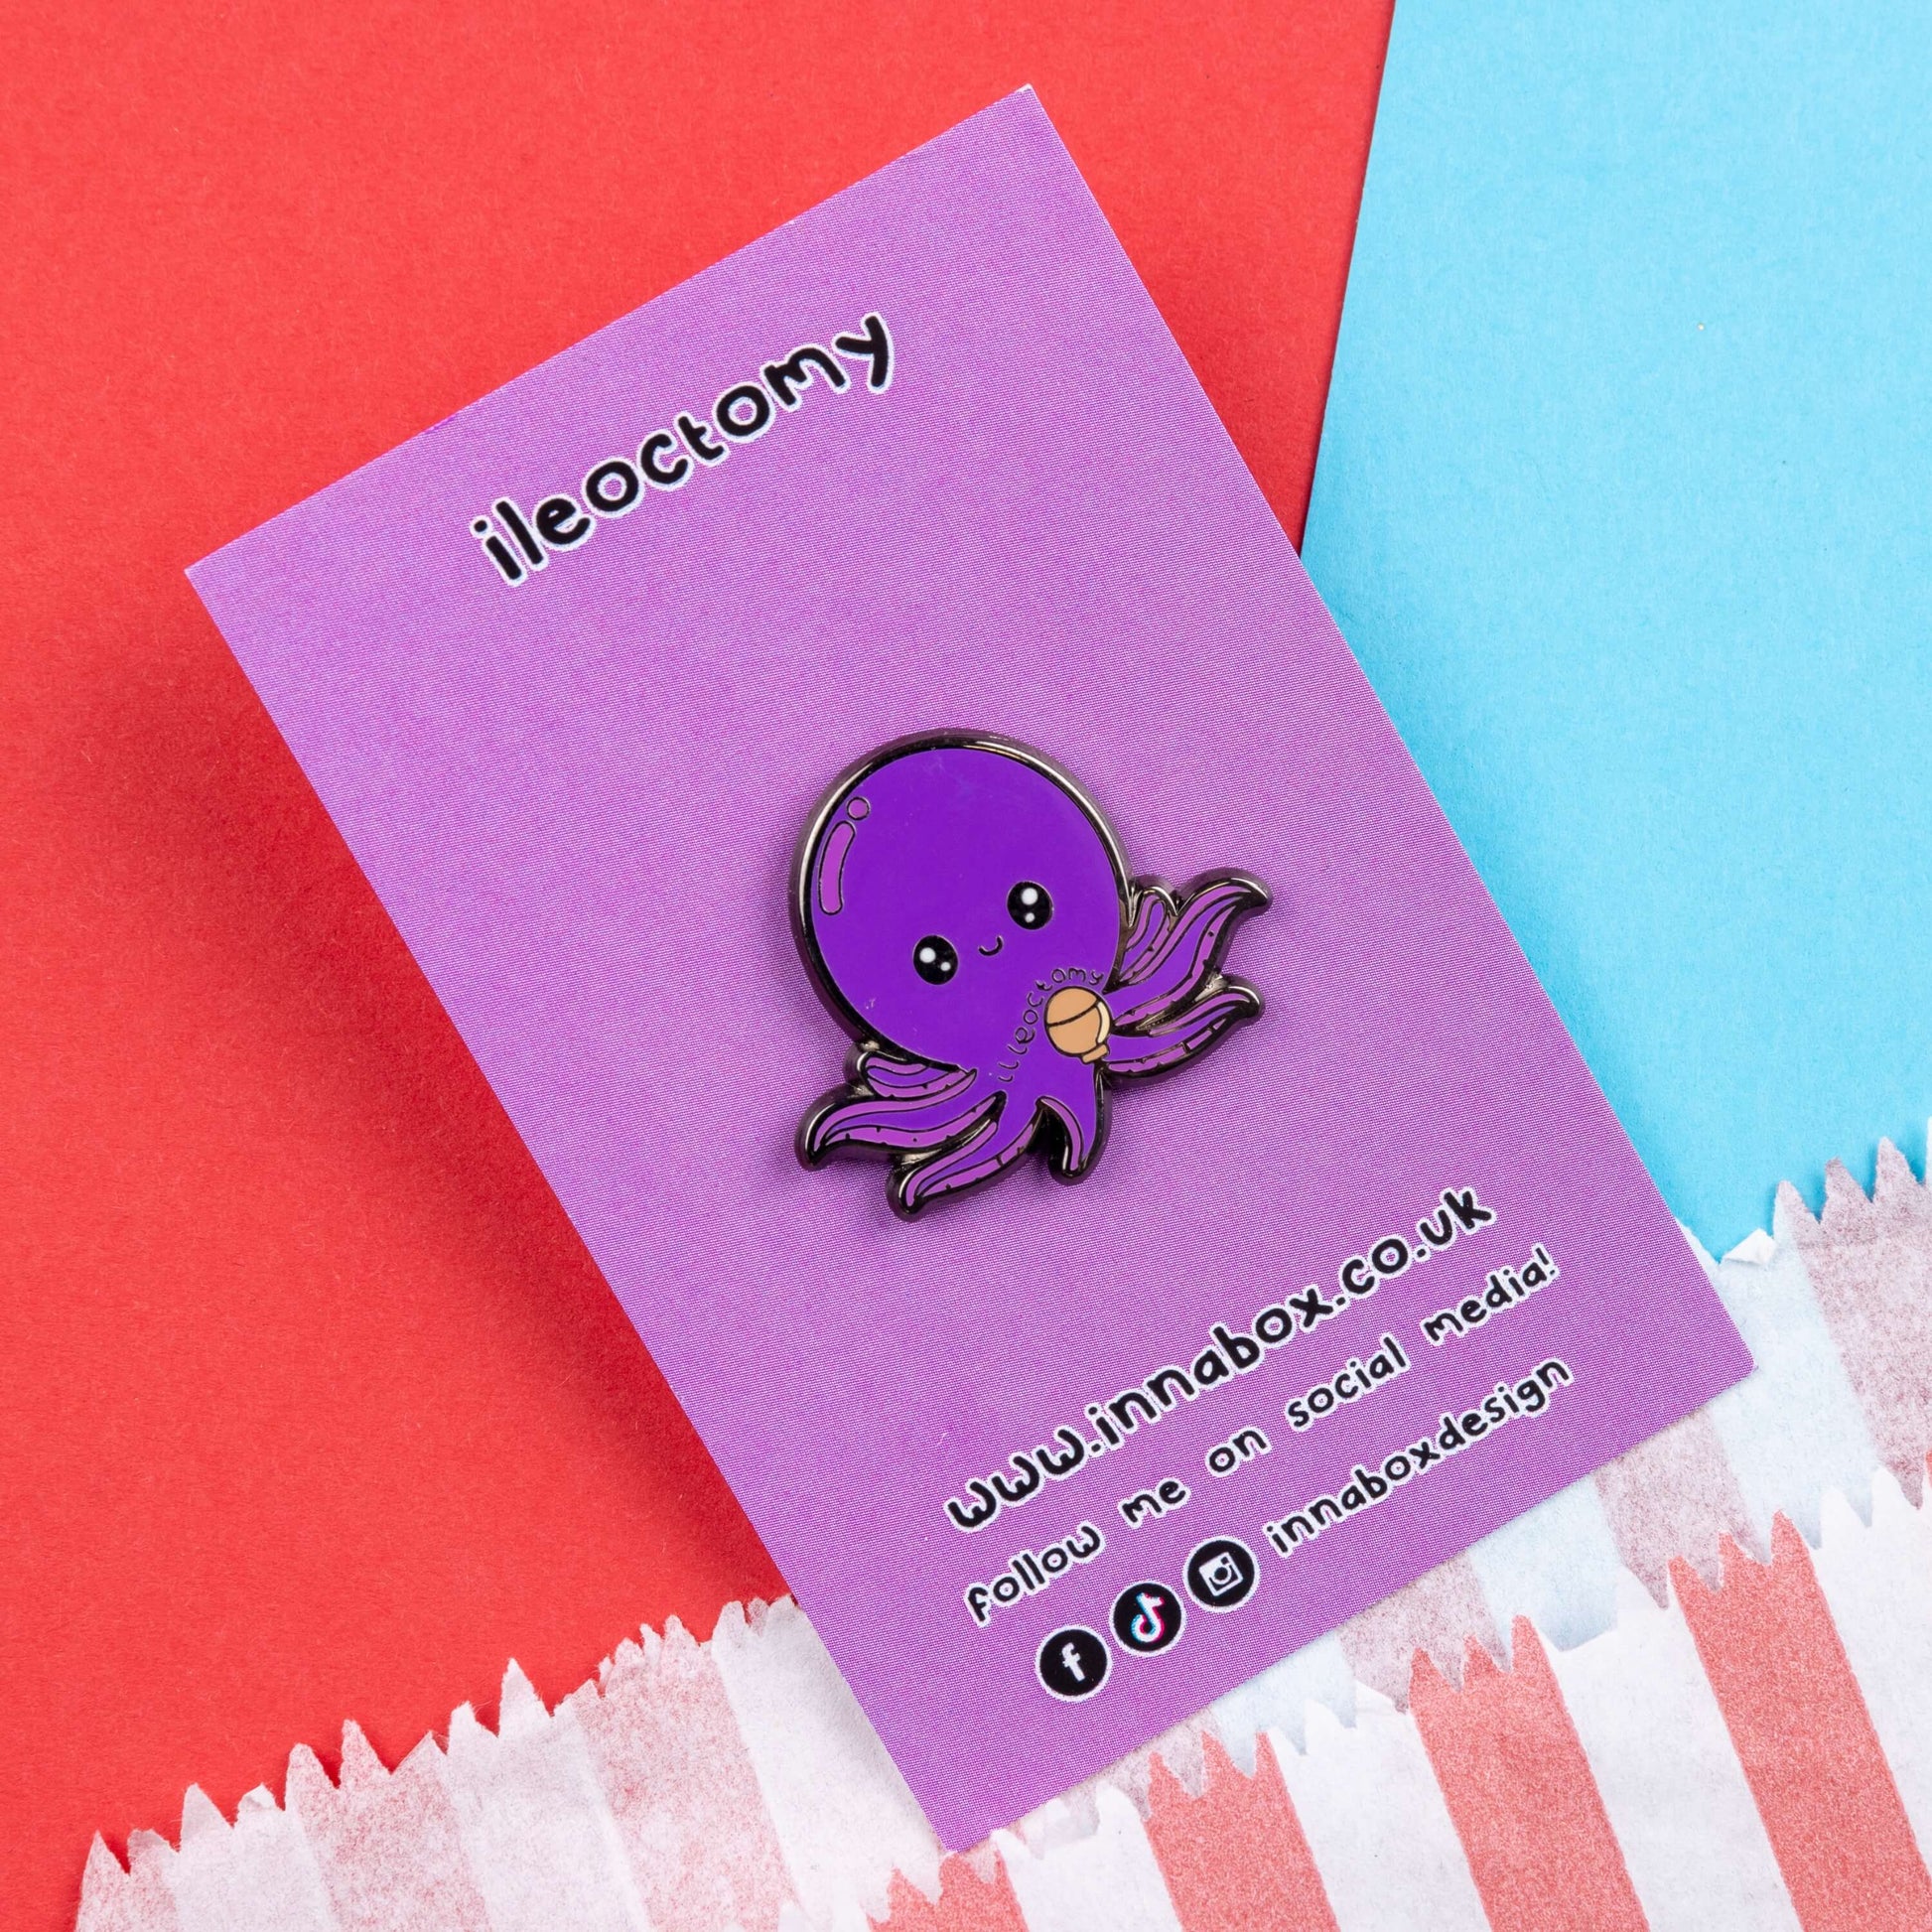 Ileoctomy Enamel Pin - Ileostomy on purple backing card laid on a blue and red card background. The enamel pin is a cute smiling purple octopus sticker with text saying ileoctomy on its belly with a stoma bag underneath. Enamel pin designed to raise awareness for Ileostomy.